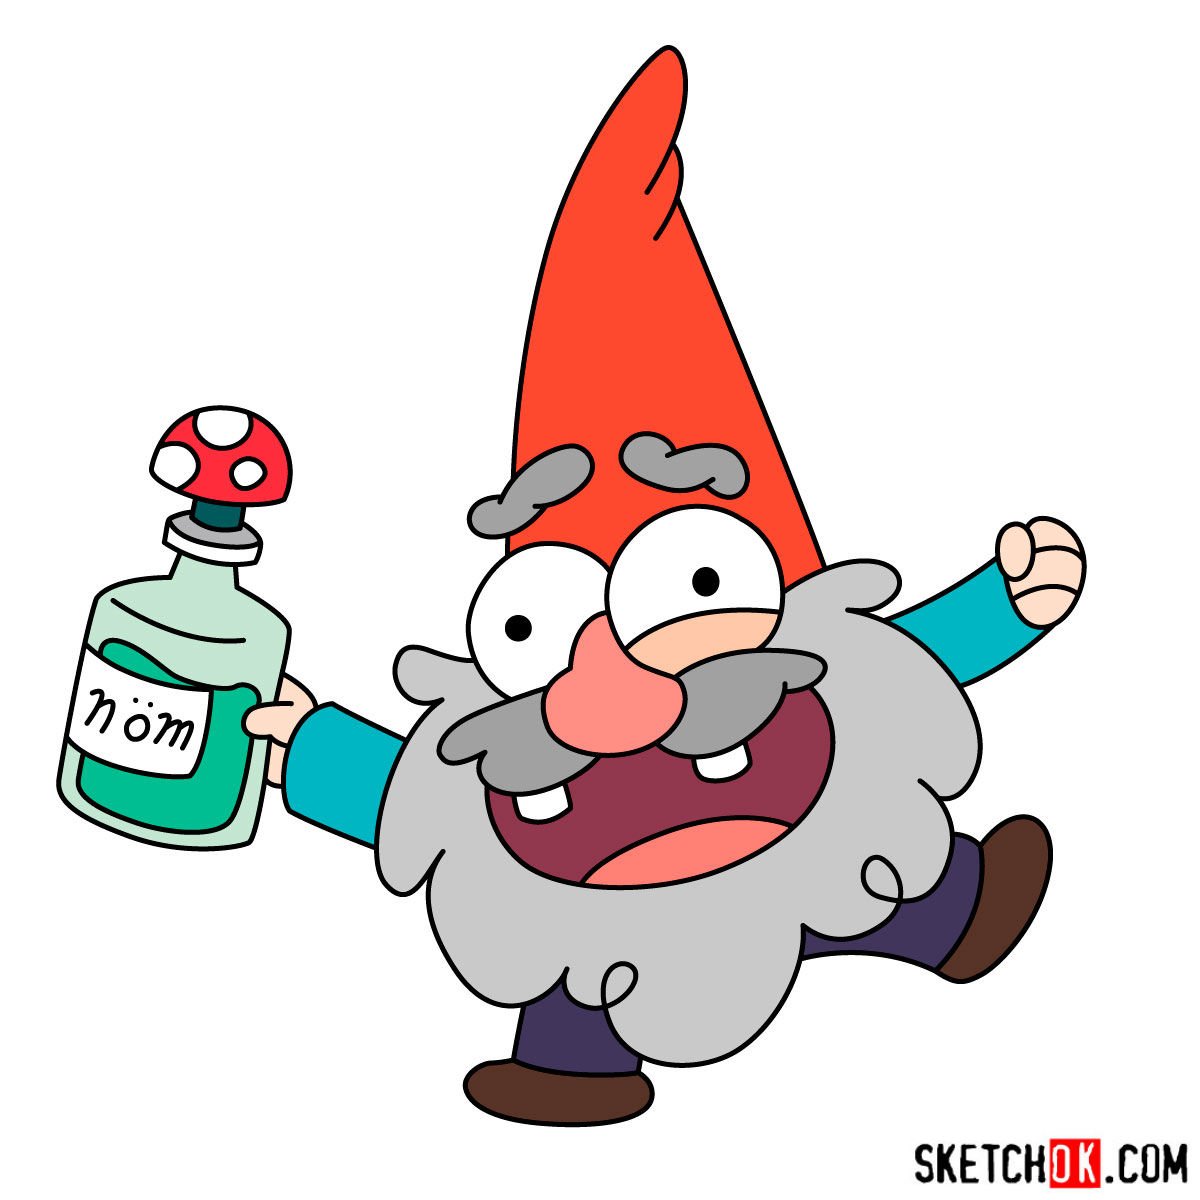 How to Draw a Gnome from Gravity Falls: A Step-by-Step Guide